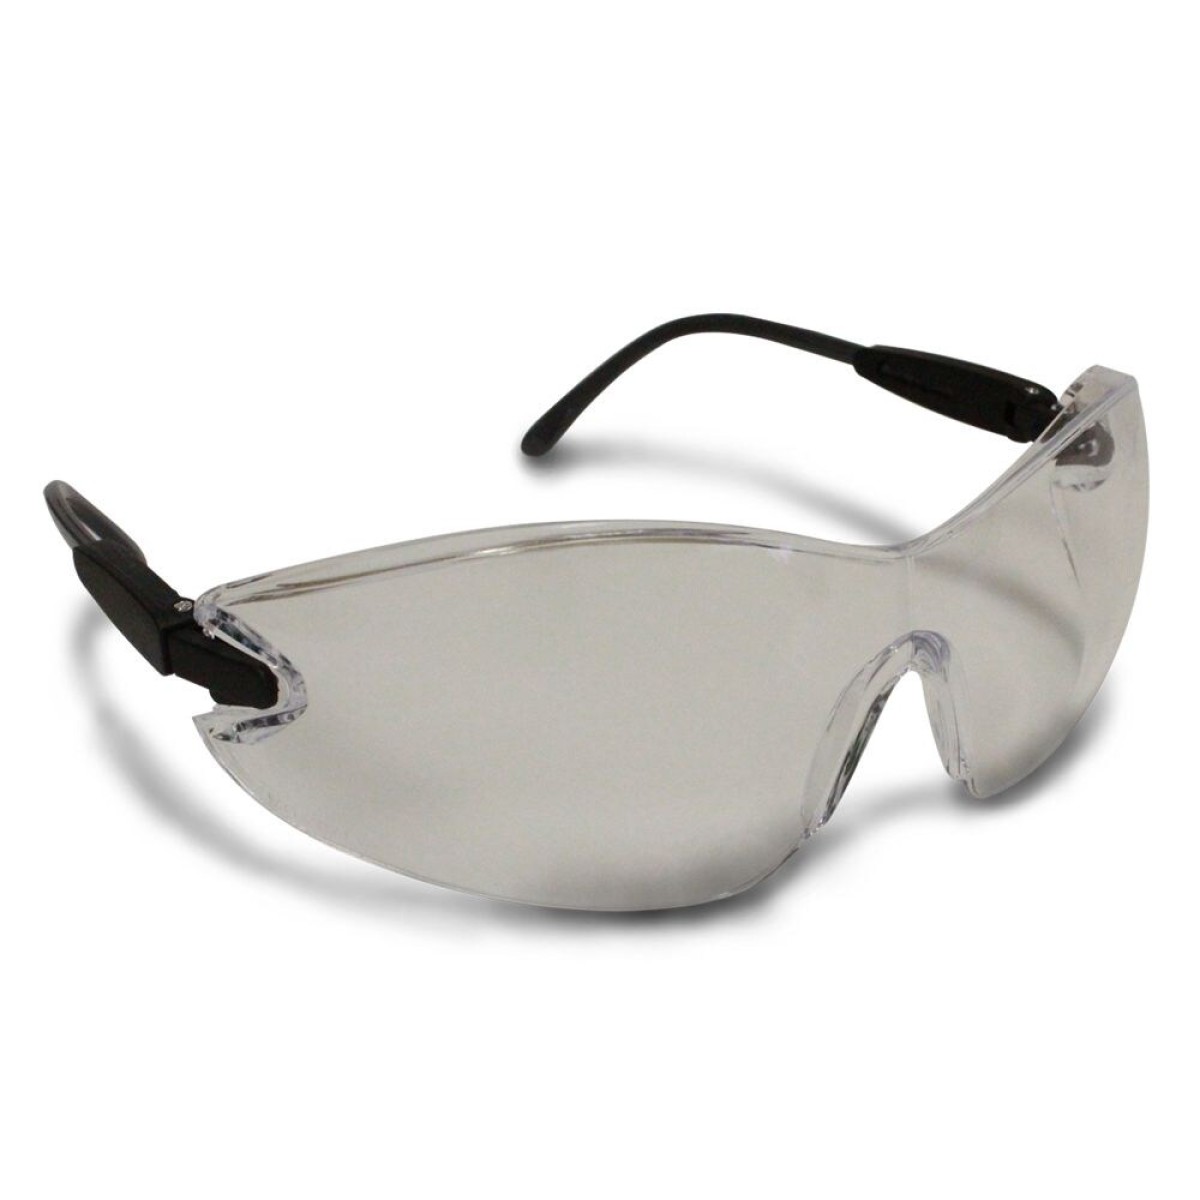 BROOKLYN SAFETY GLASSES CLEAR LENS RETAIL PACK